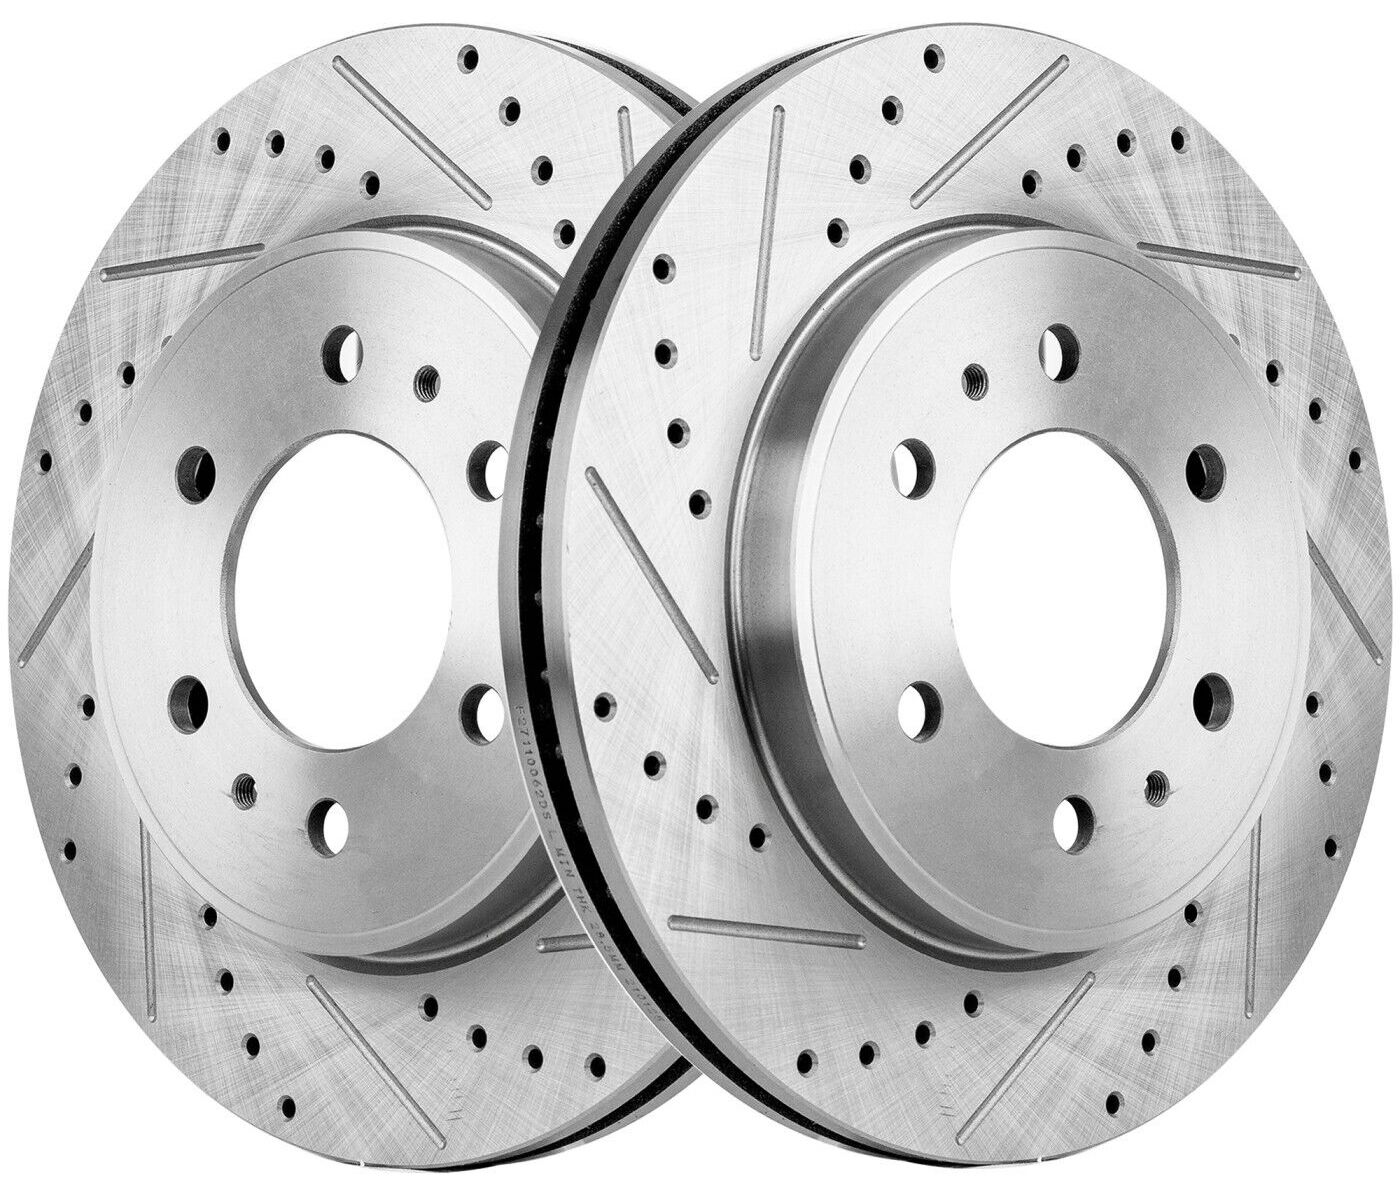 Slotted and drilled rotors.